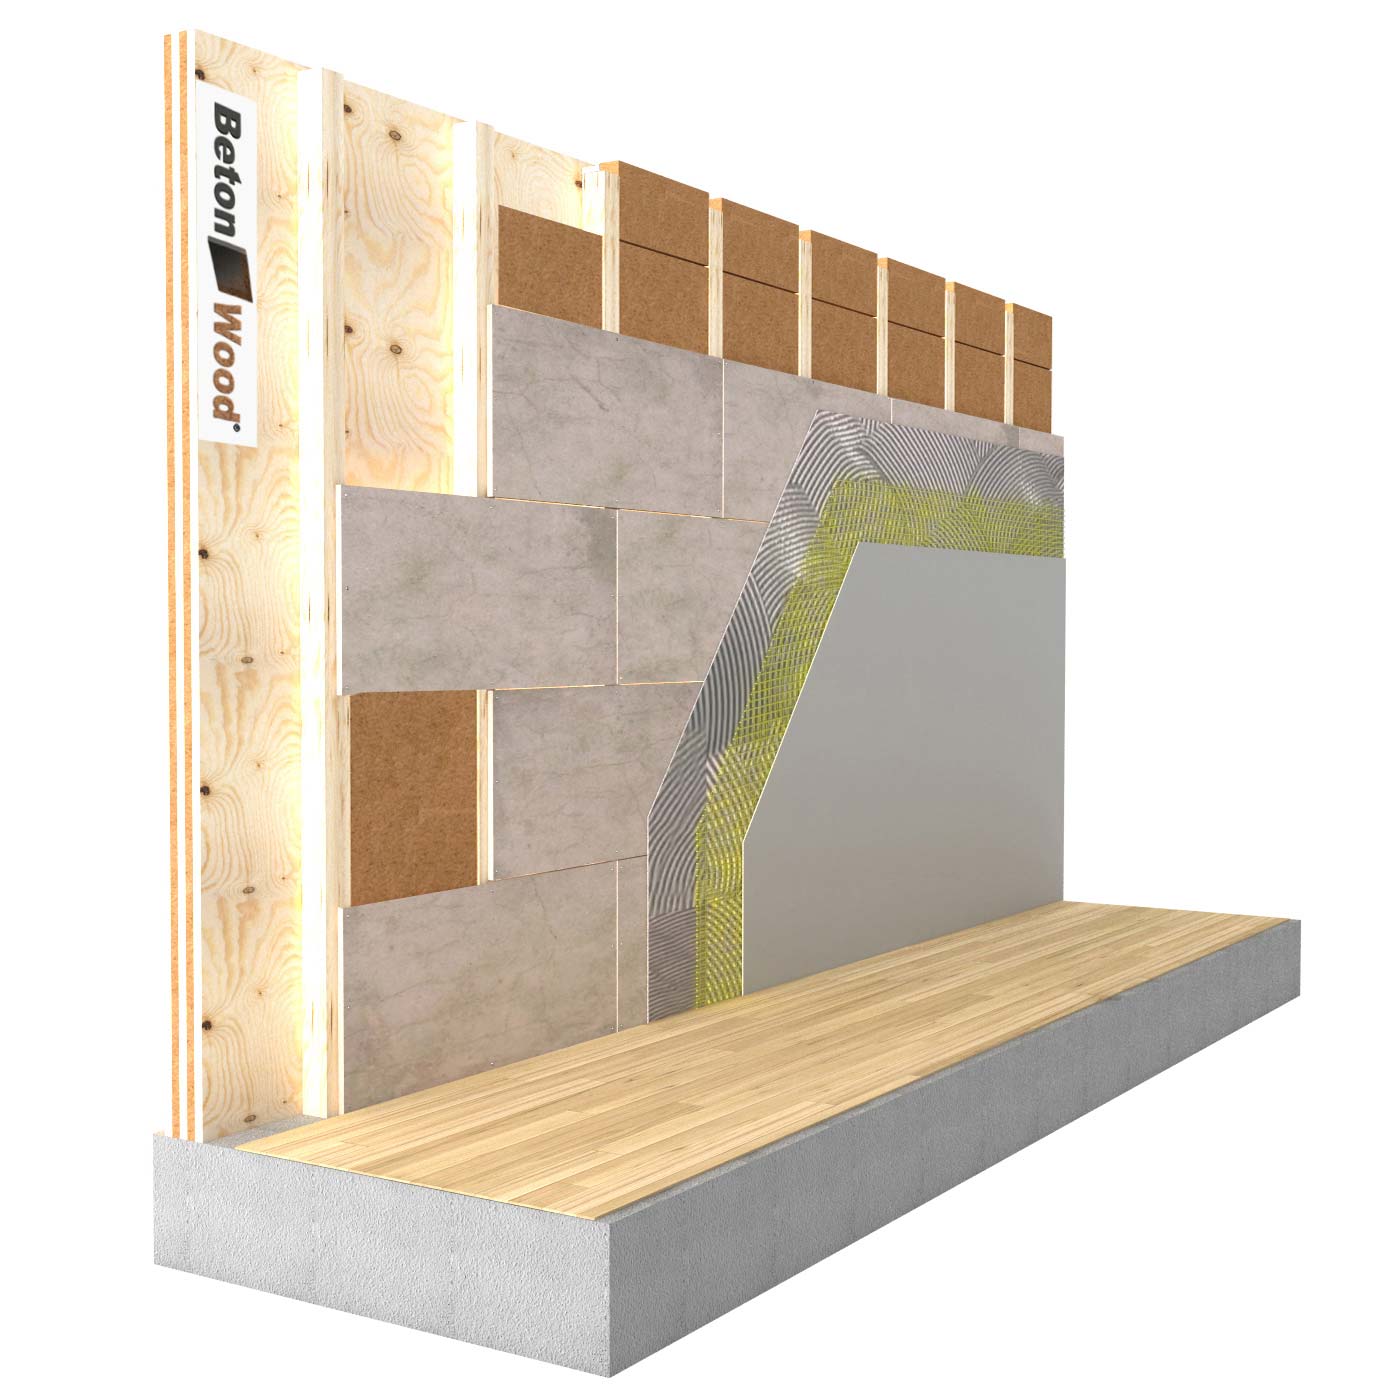 Internal insulation system with Therm SD wood fiber on wooden walls